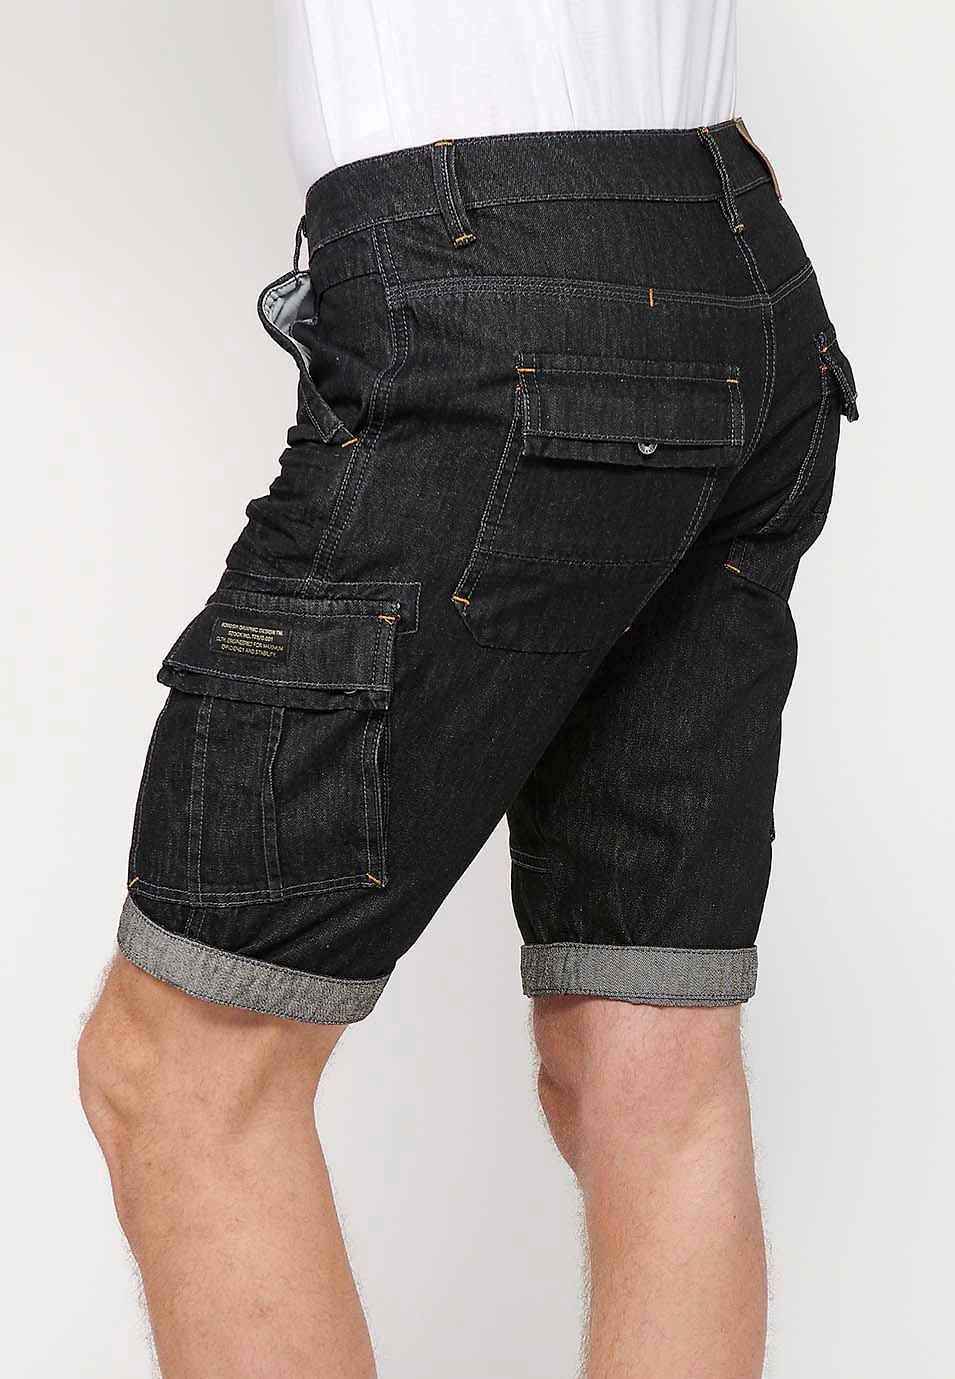 Denim Bermuda Shorts with Turn-Up Finish and Front Zipper and Button Closure with Pockets, One Ticket Pocket and Two Side Pockets in Black for Men 9